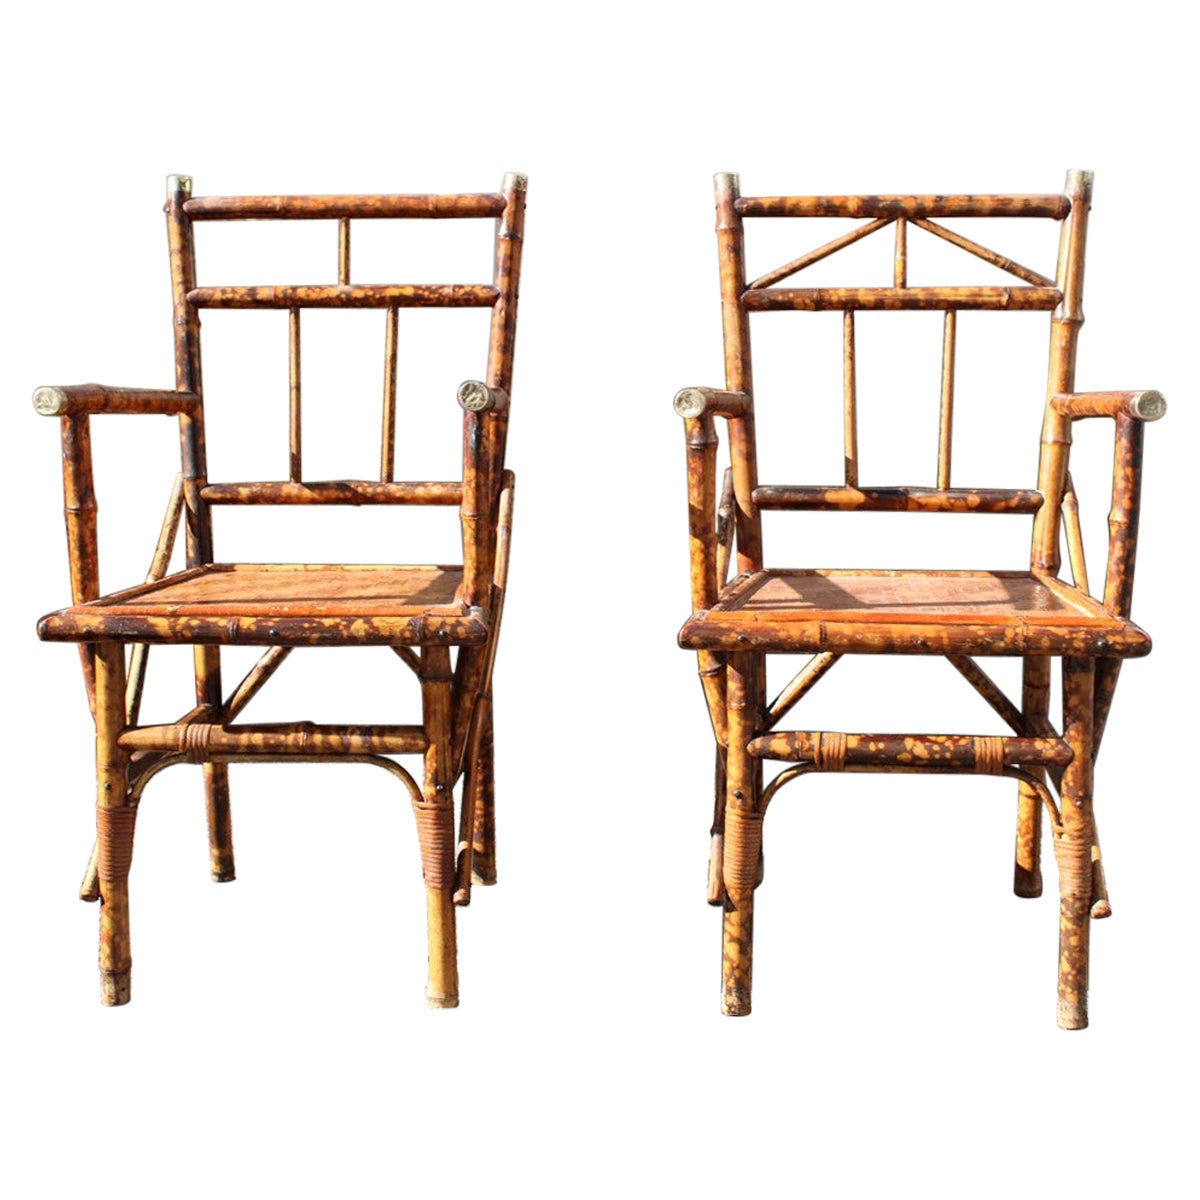 Pair Mid-Century Bamboo Chairs Brass Parts Gabriella Crespi Style 1950s For Sale